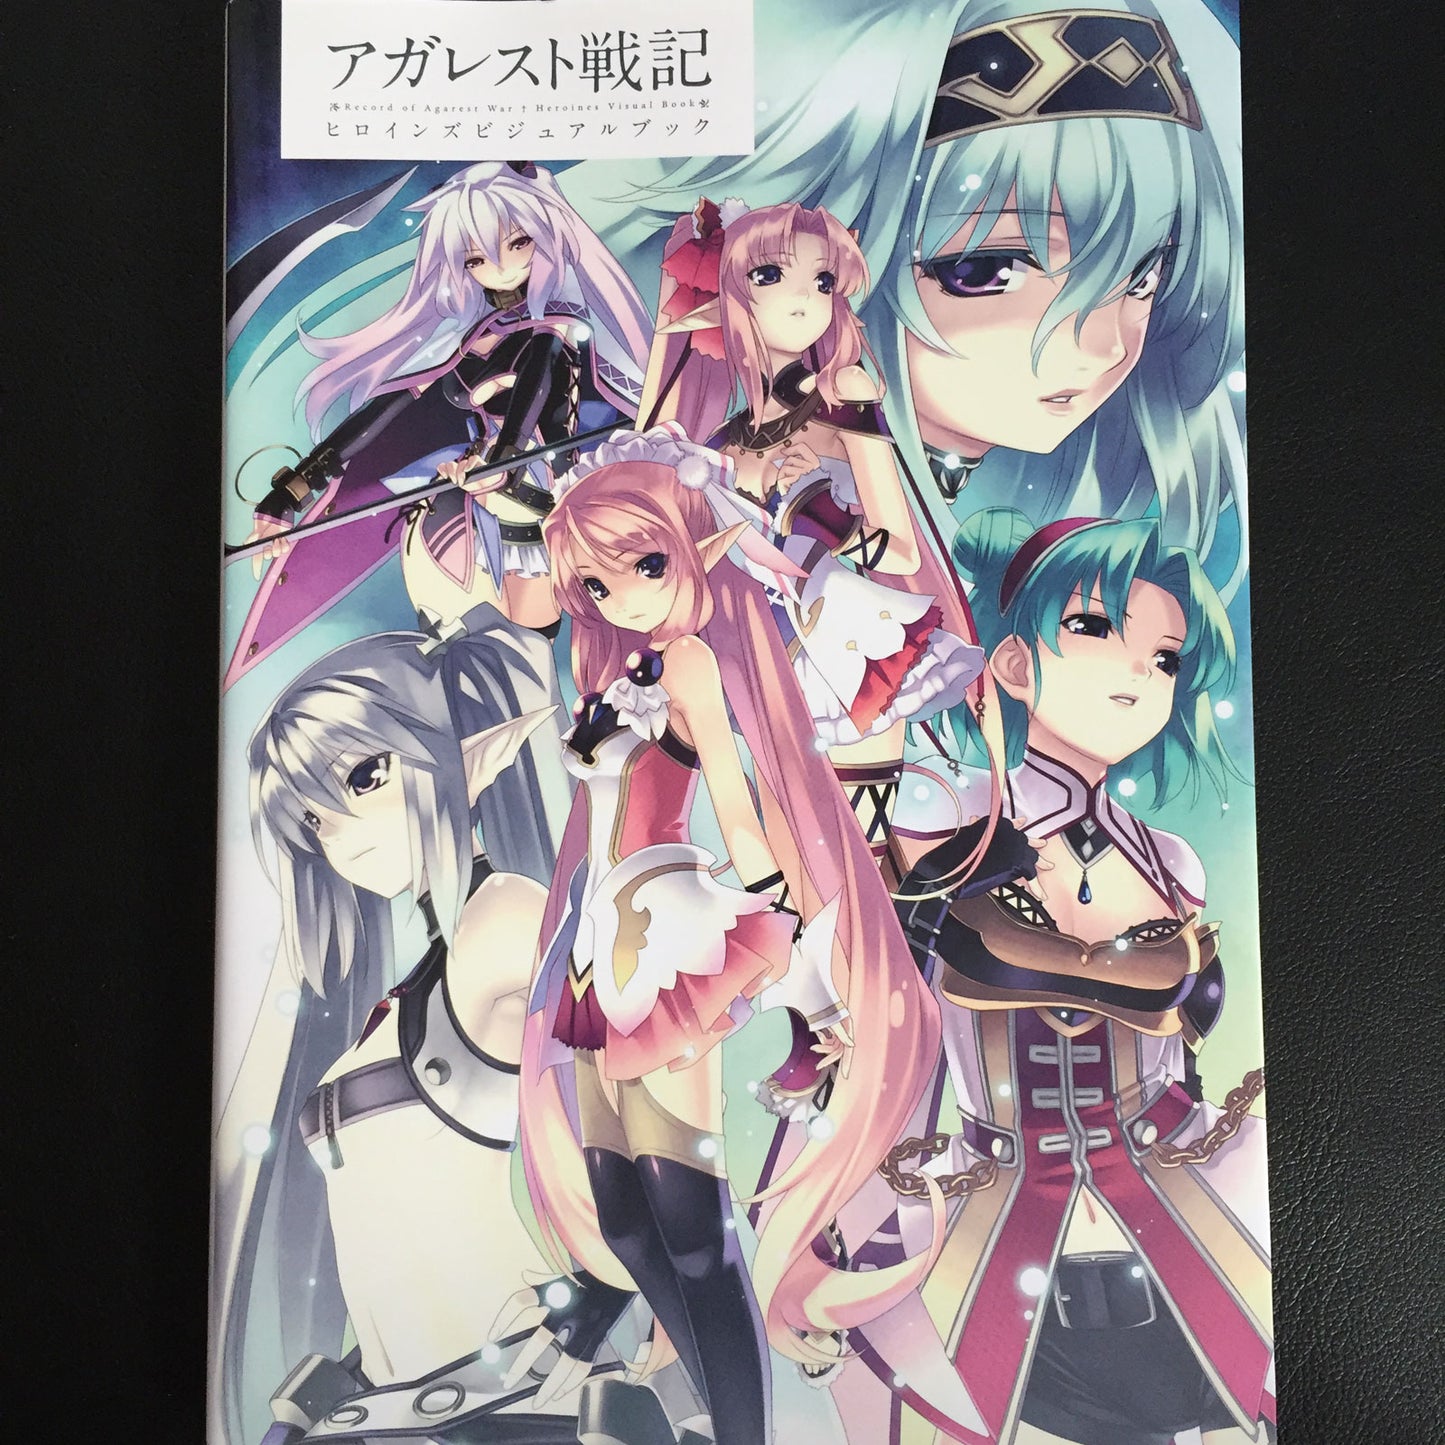 Record of Agarest War Heroines Visual Book